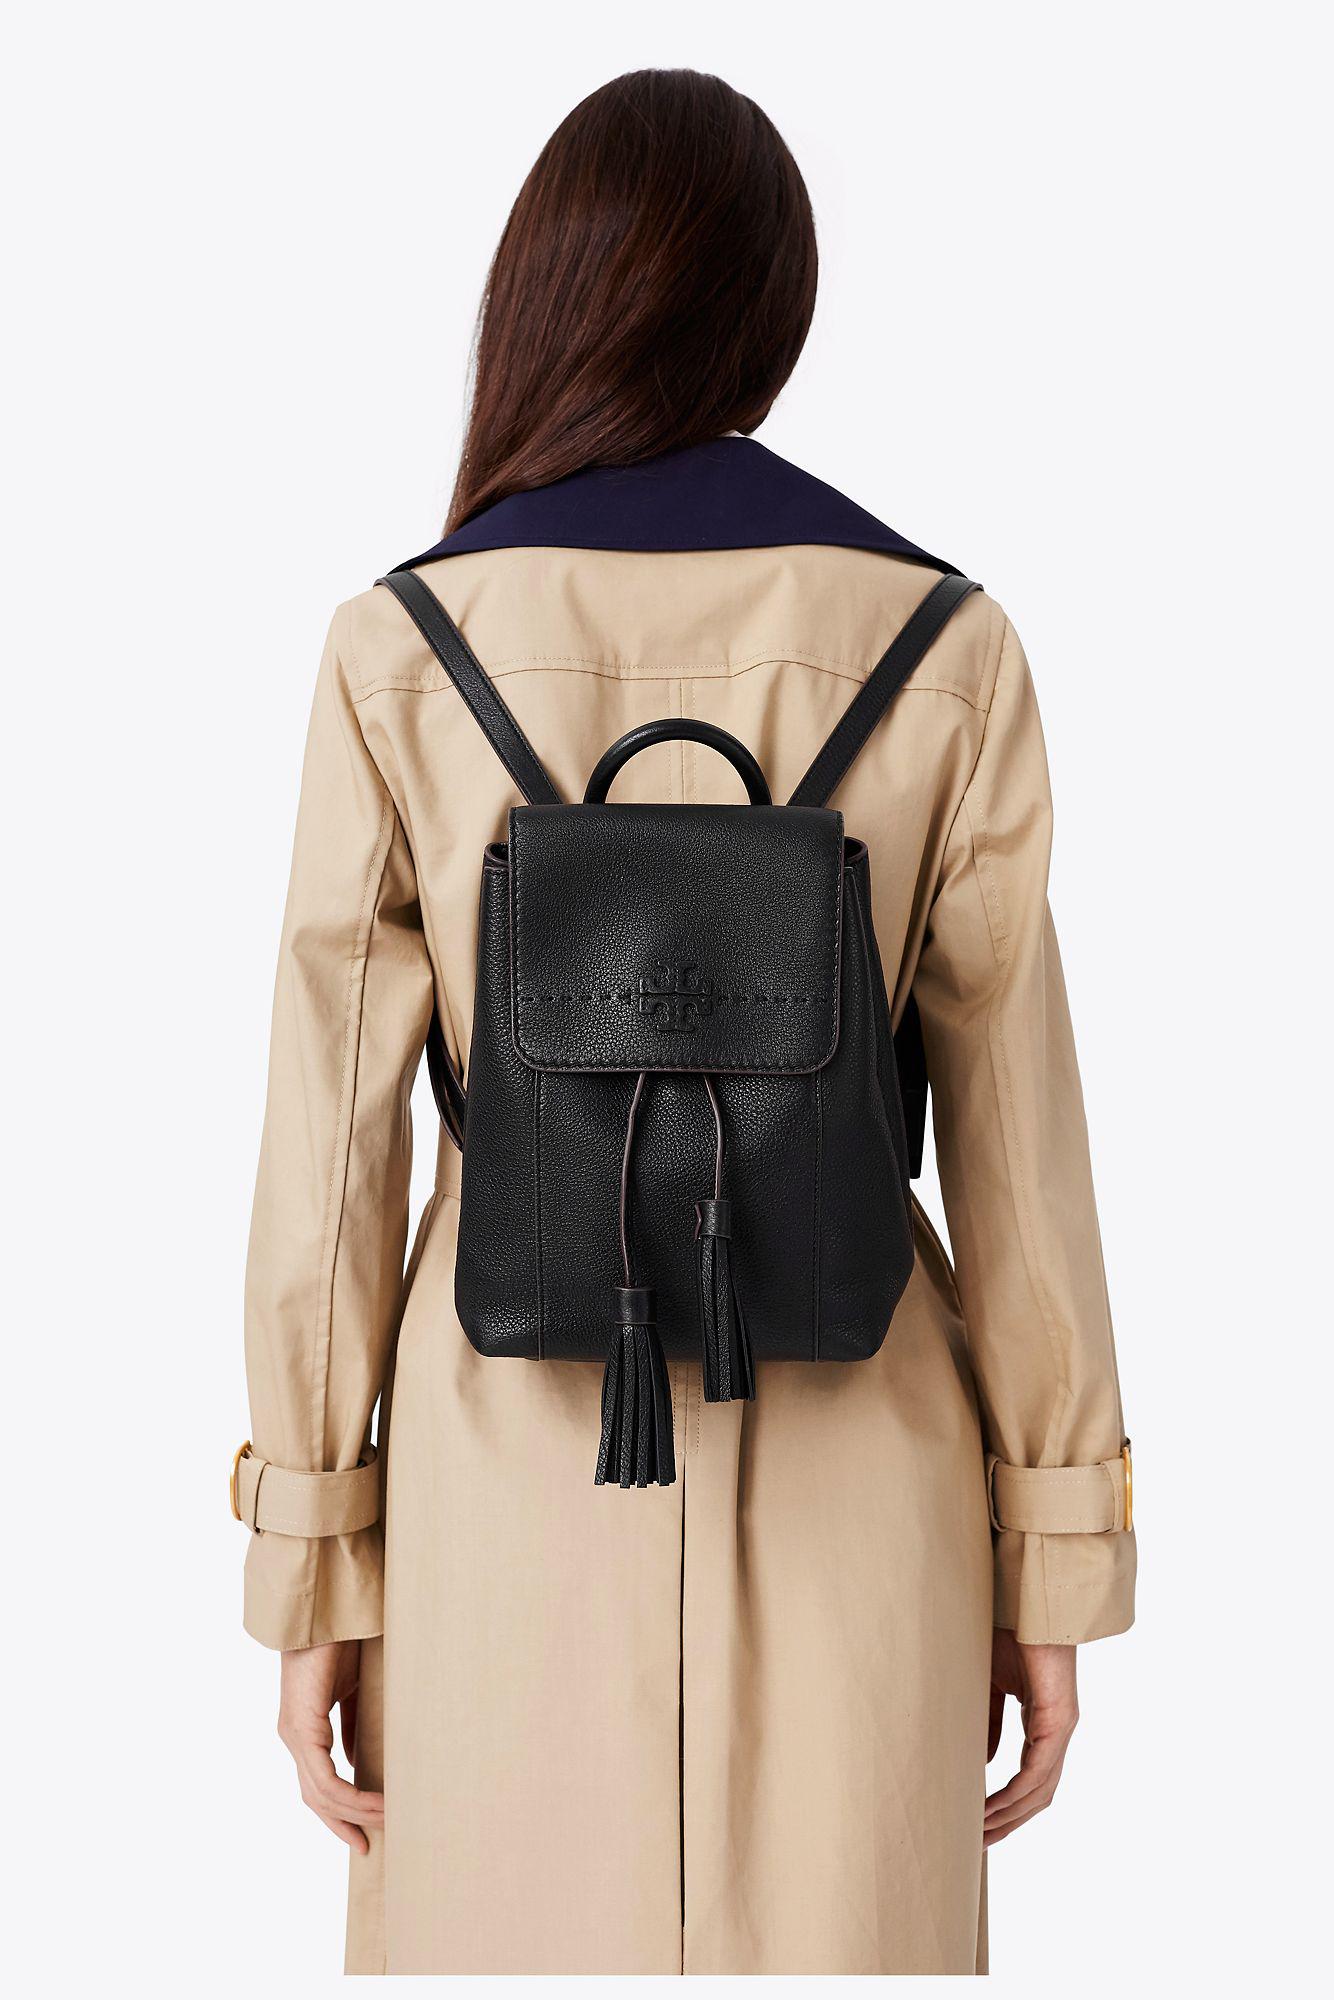 Tory Burch Mcgraw Backpack in Black | Lyst